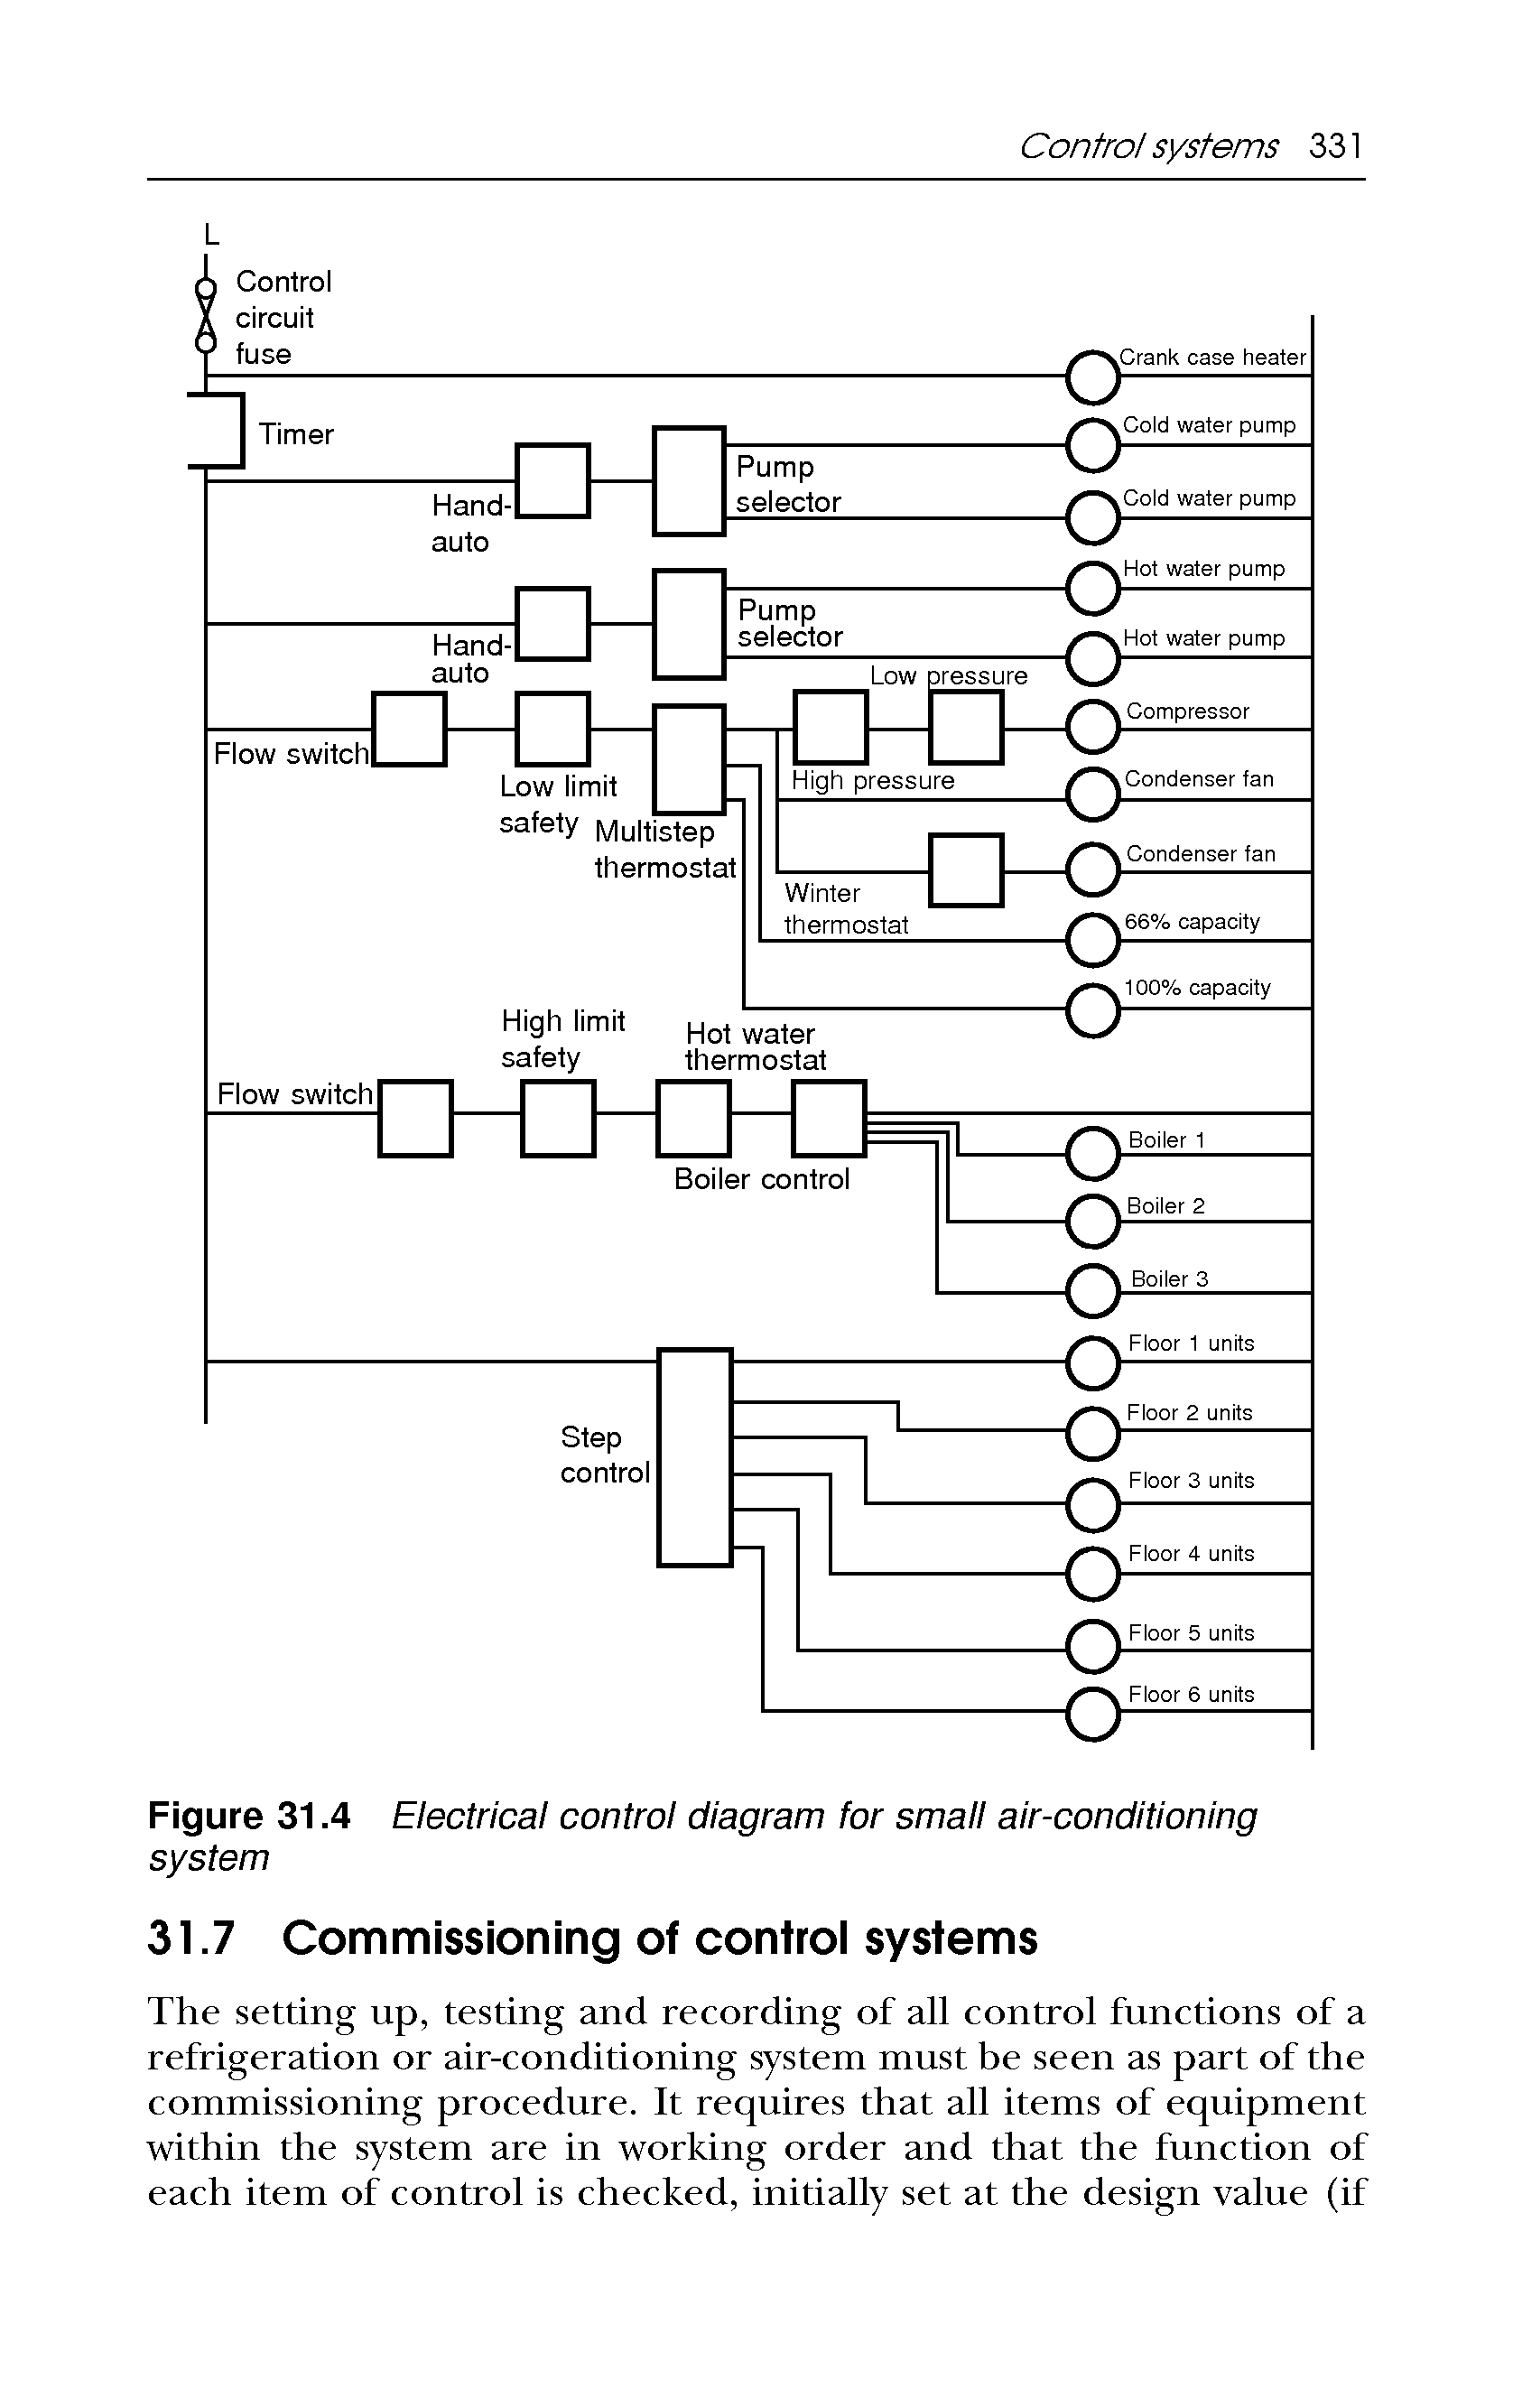 Figure 31.4 Electrical control diagram for small air-conditioning system...